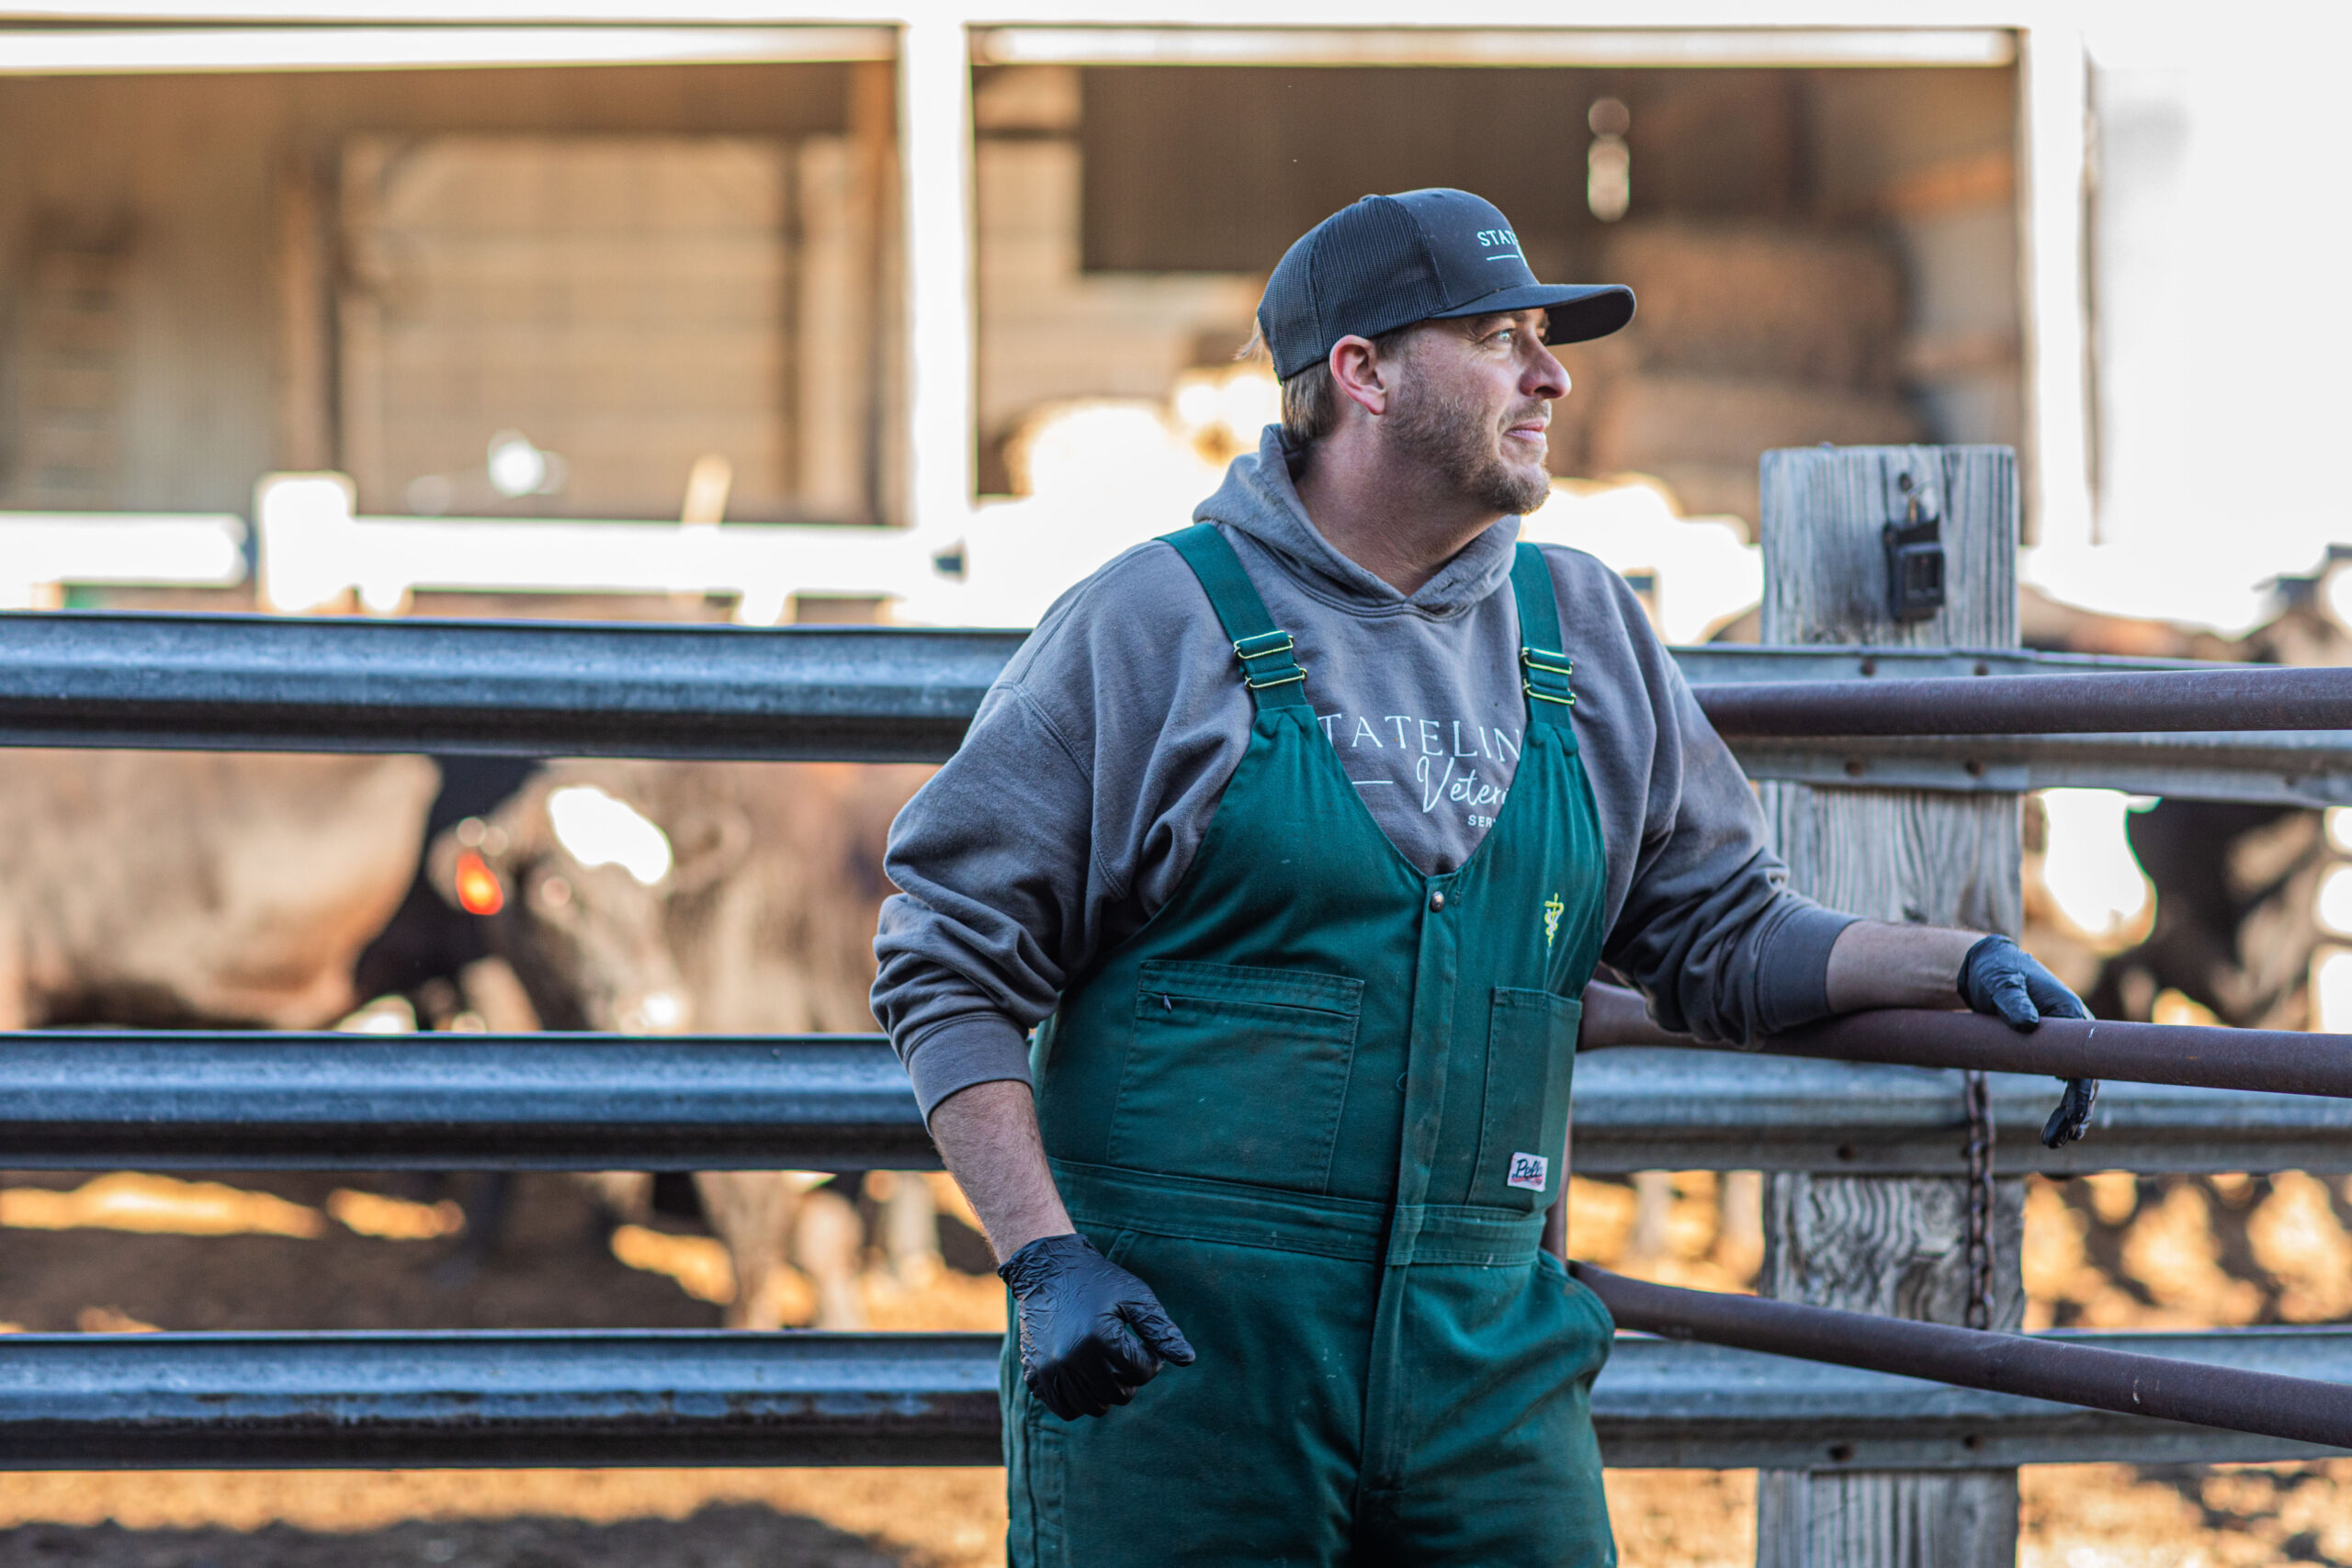 A farmer in green overalls and a black baseball cap observes cows behind a metal fence, creating a calm atmosphere on the farm. "STATELINE VETERINARY SERVICES."